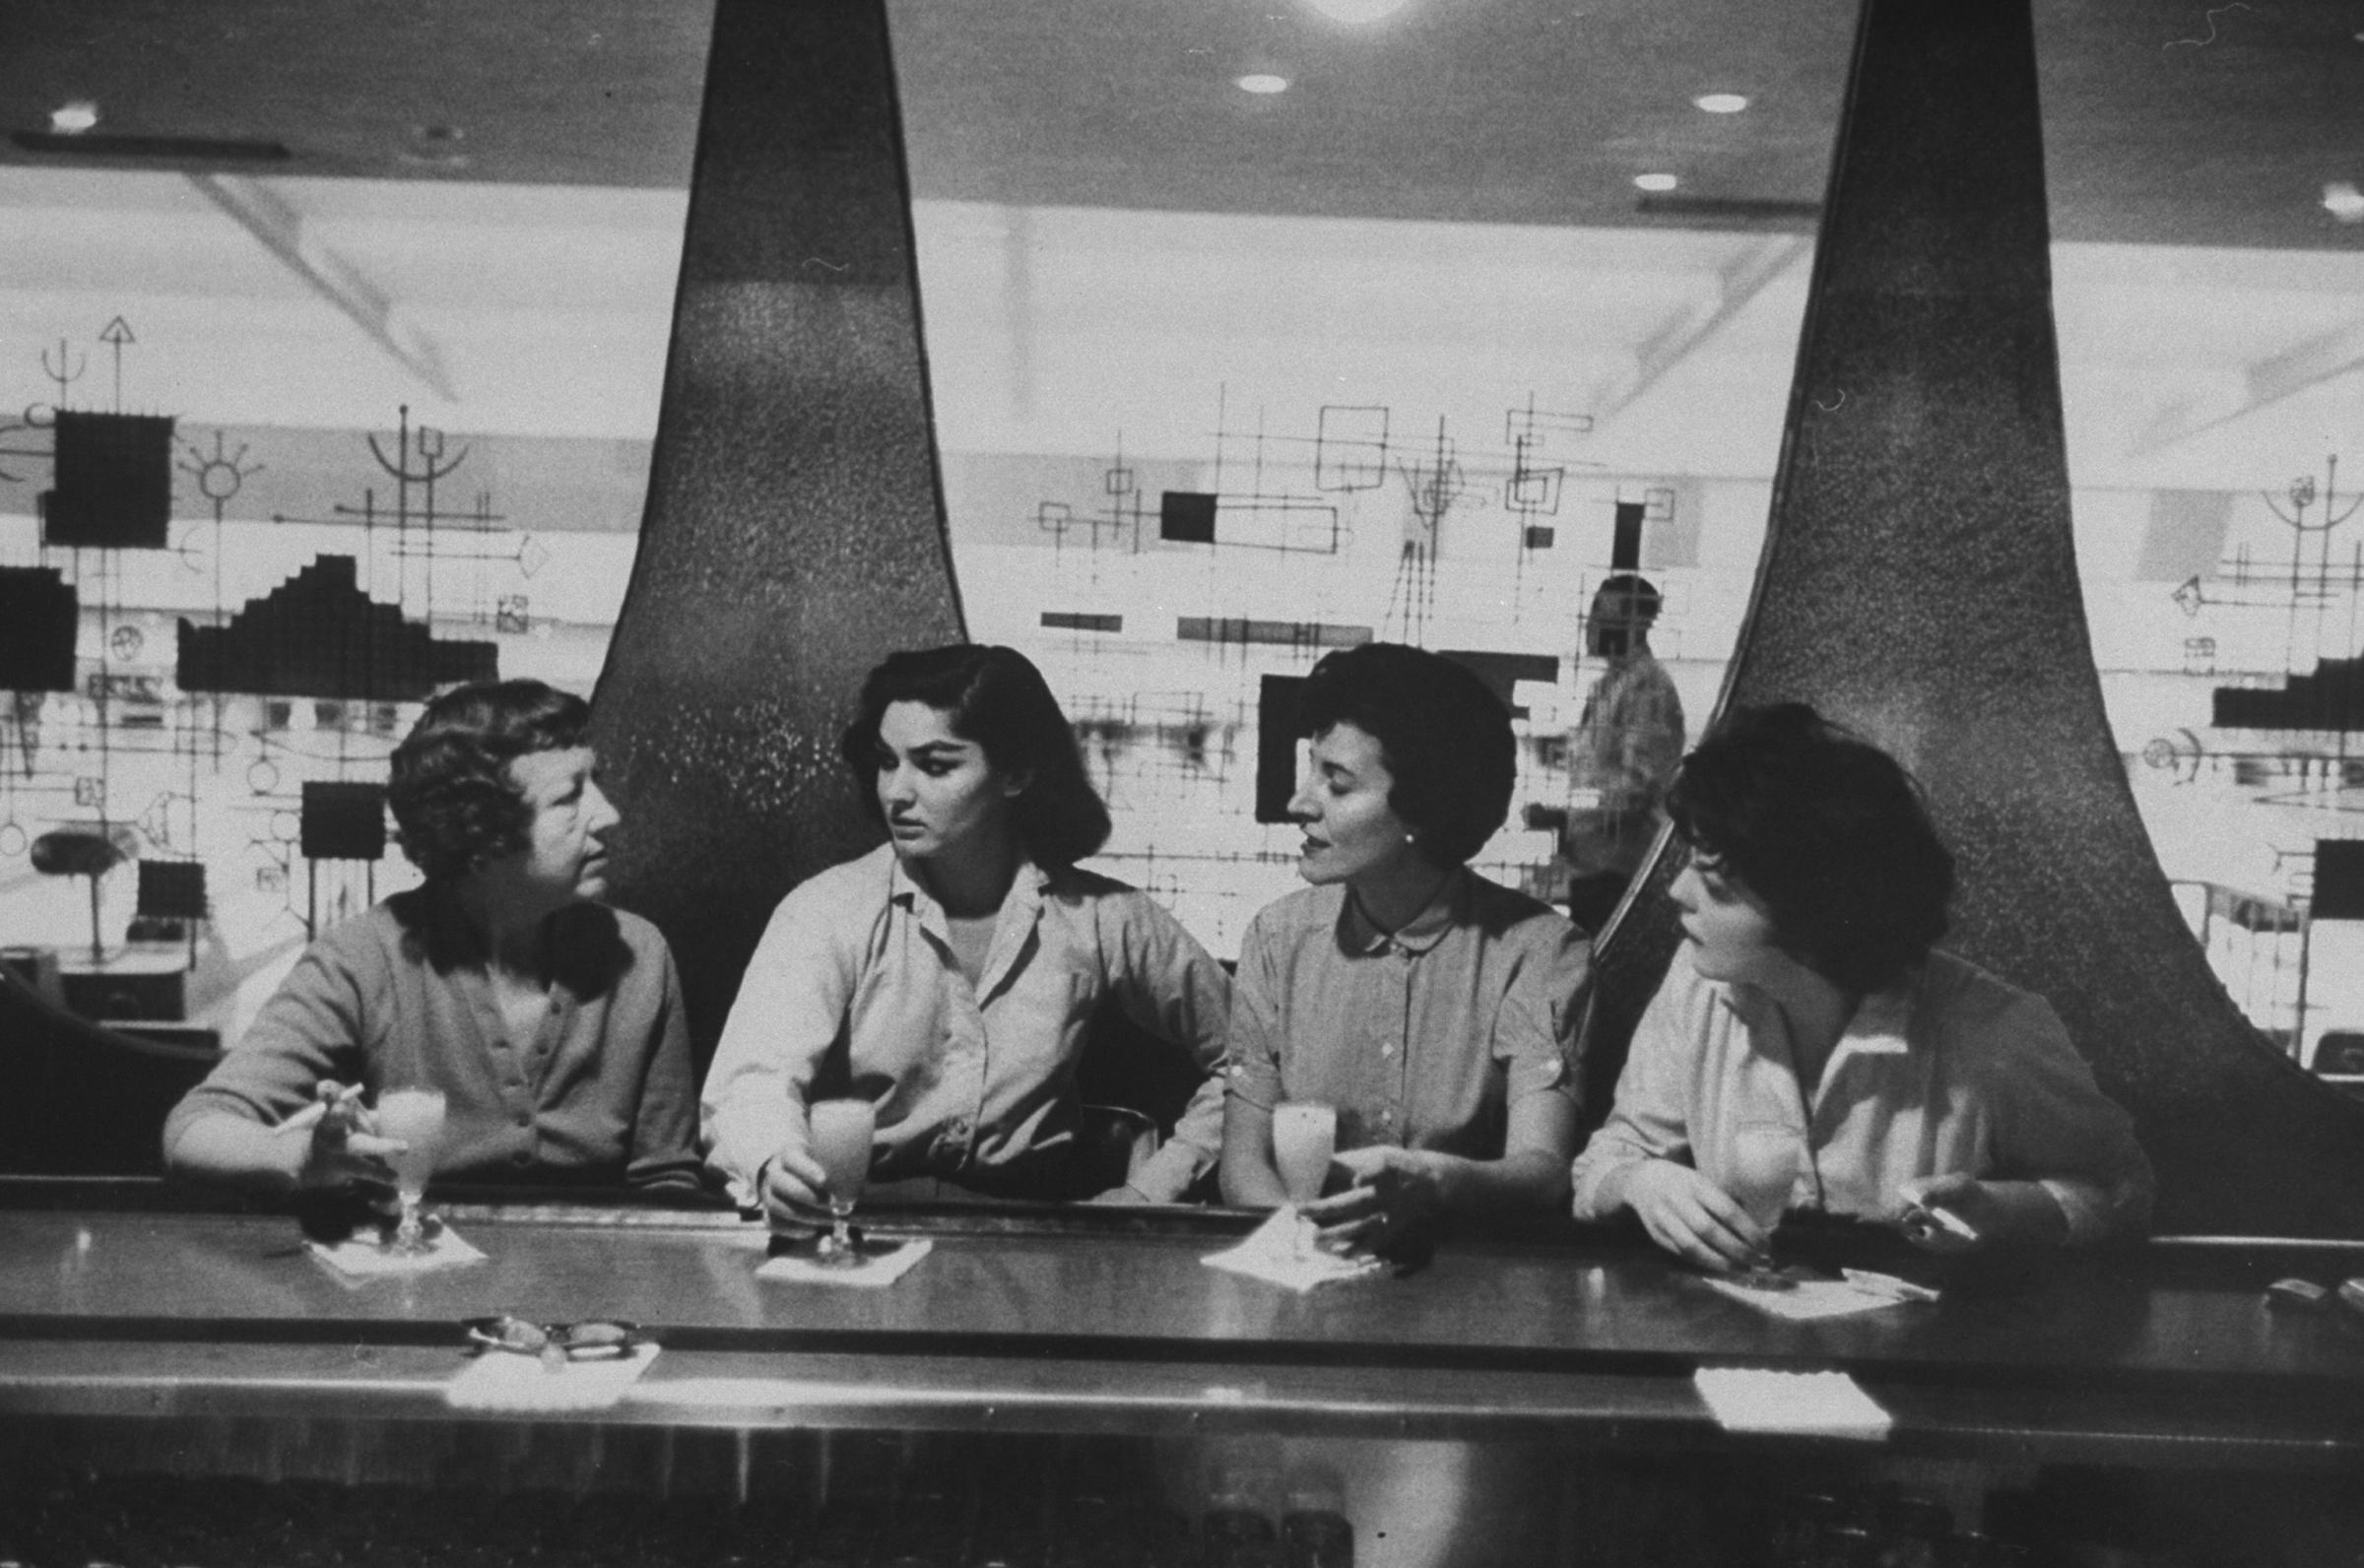 Women at a bowling alley bar celebrate their high-scoring game with a round of drinks.